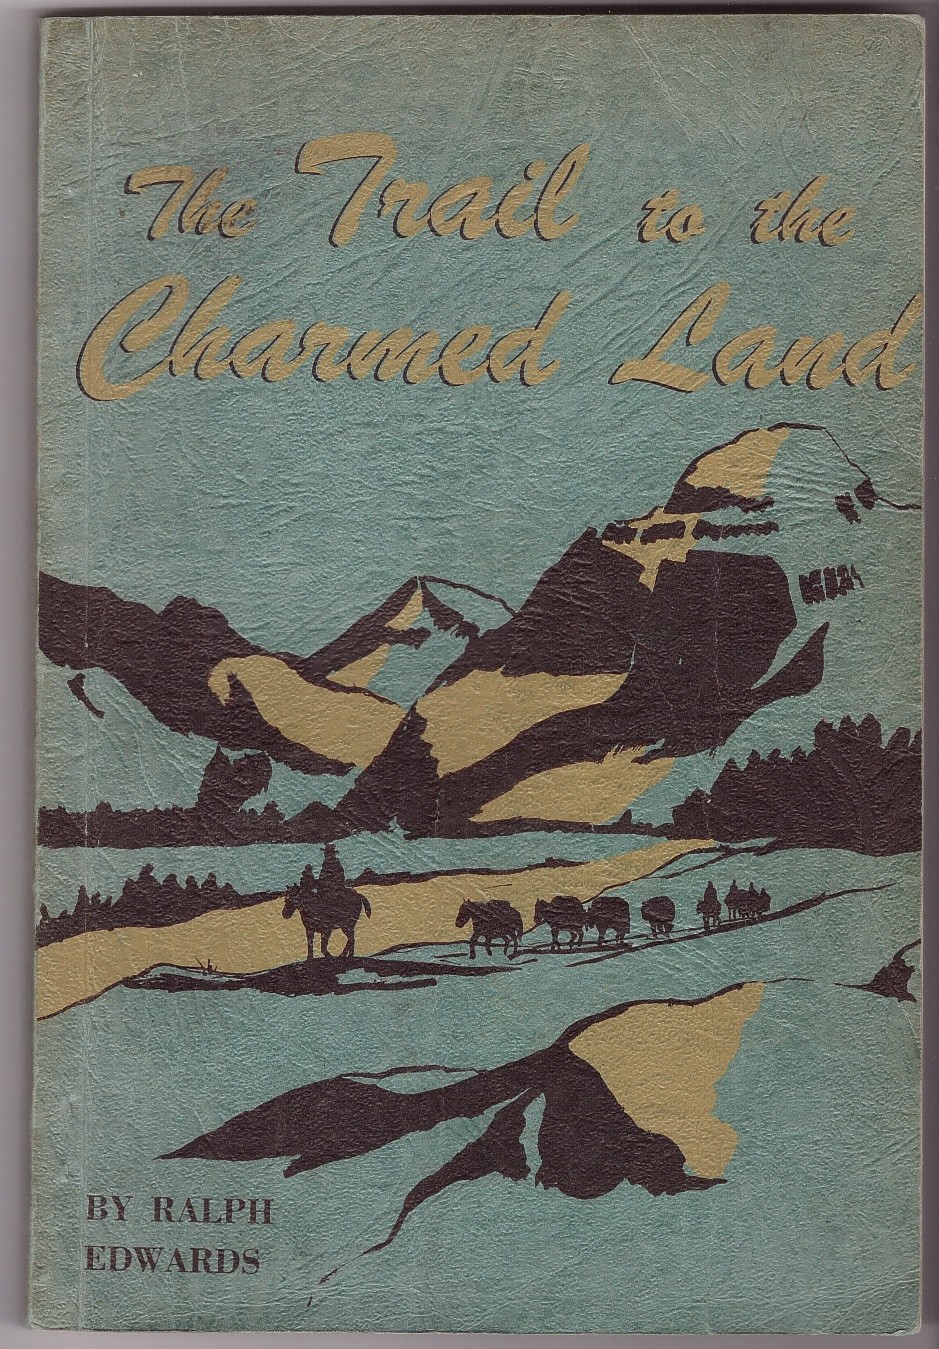 EDWARDS, RALPH E. W. - The Trail to the Charmed Land